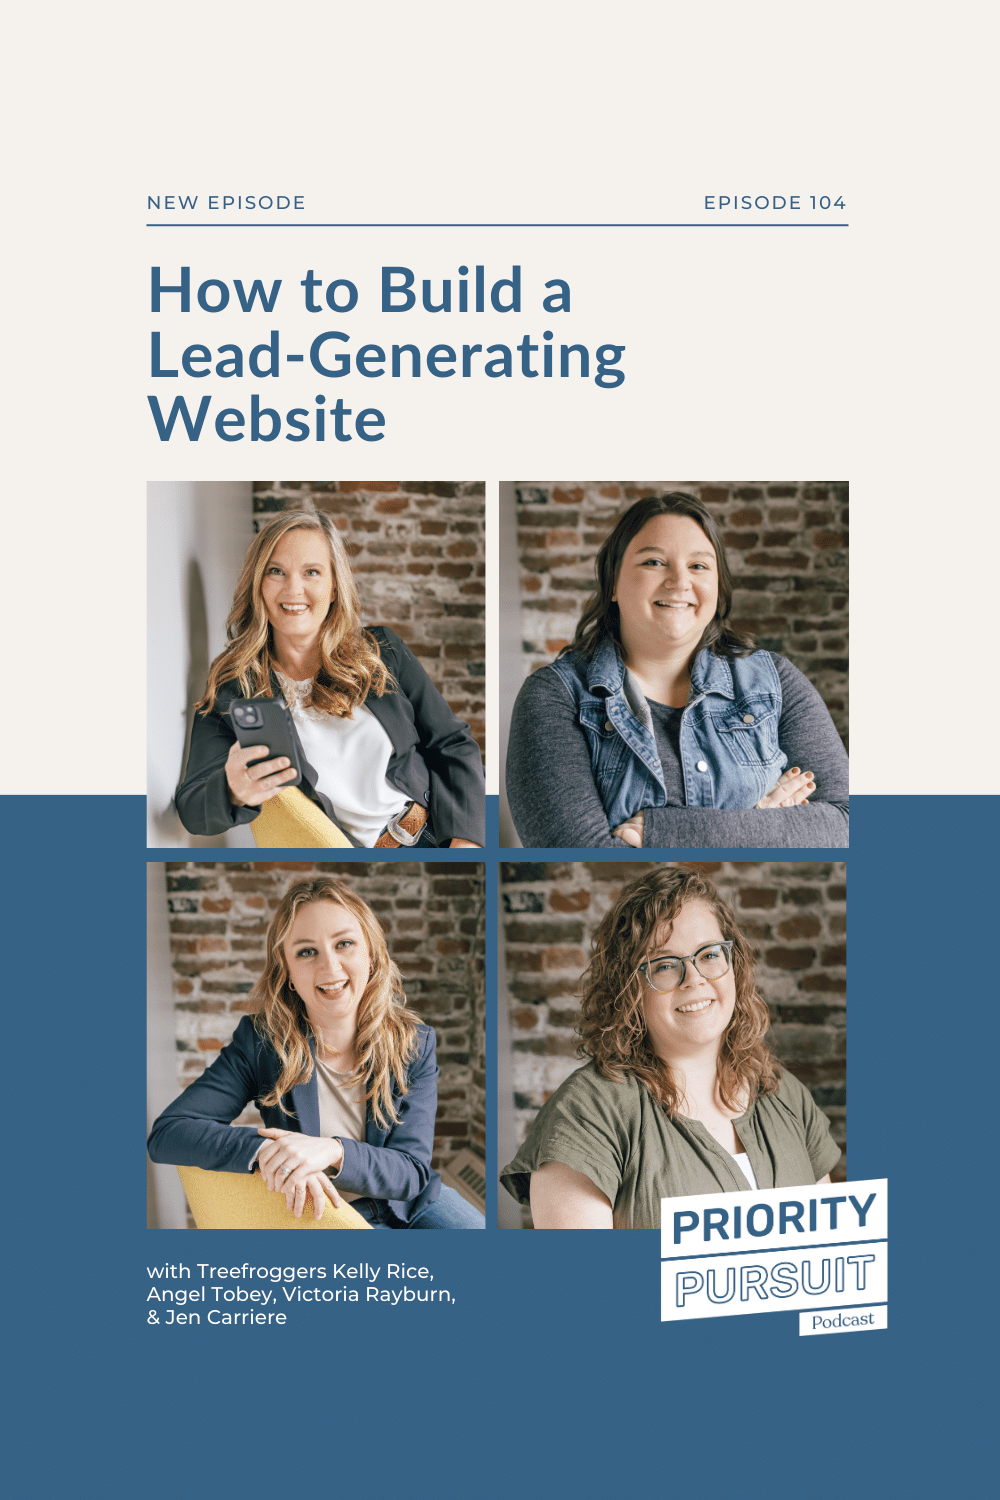 Learn how to build a lead-generating website for your small business step by step with Treefrog’s Content Director Angel Tobey and Lead Web Developer Jen Carriere.